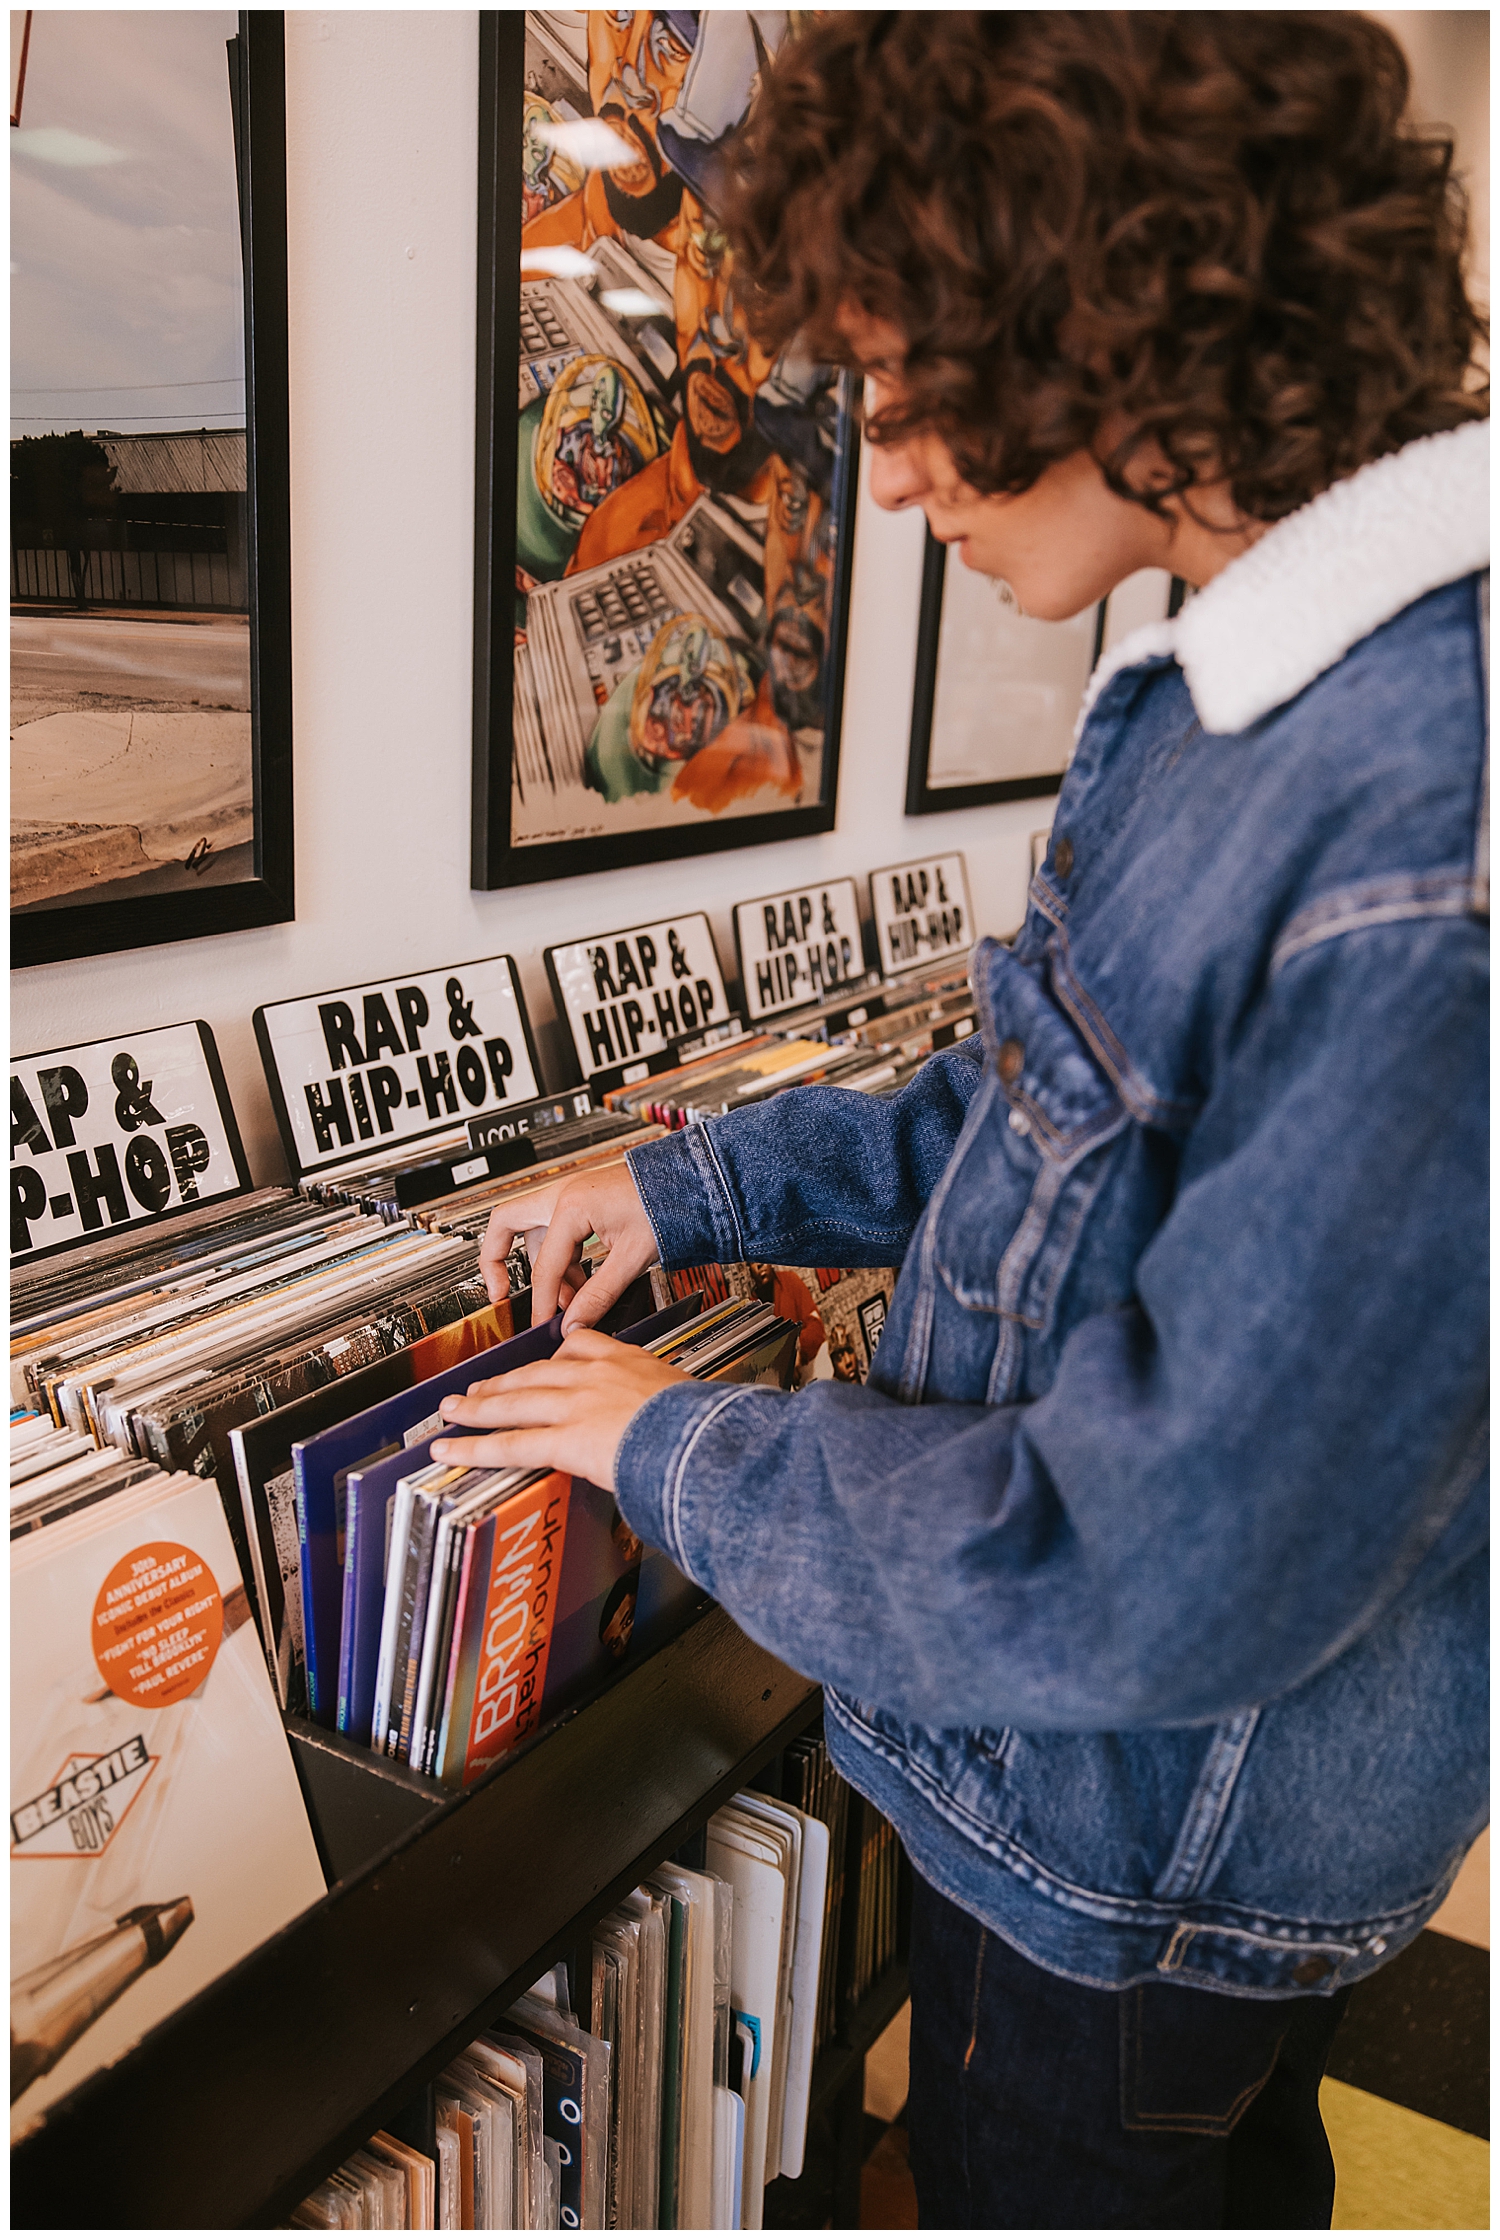 close up image of boy's hands flipping through record albums wearing denim jacket